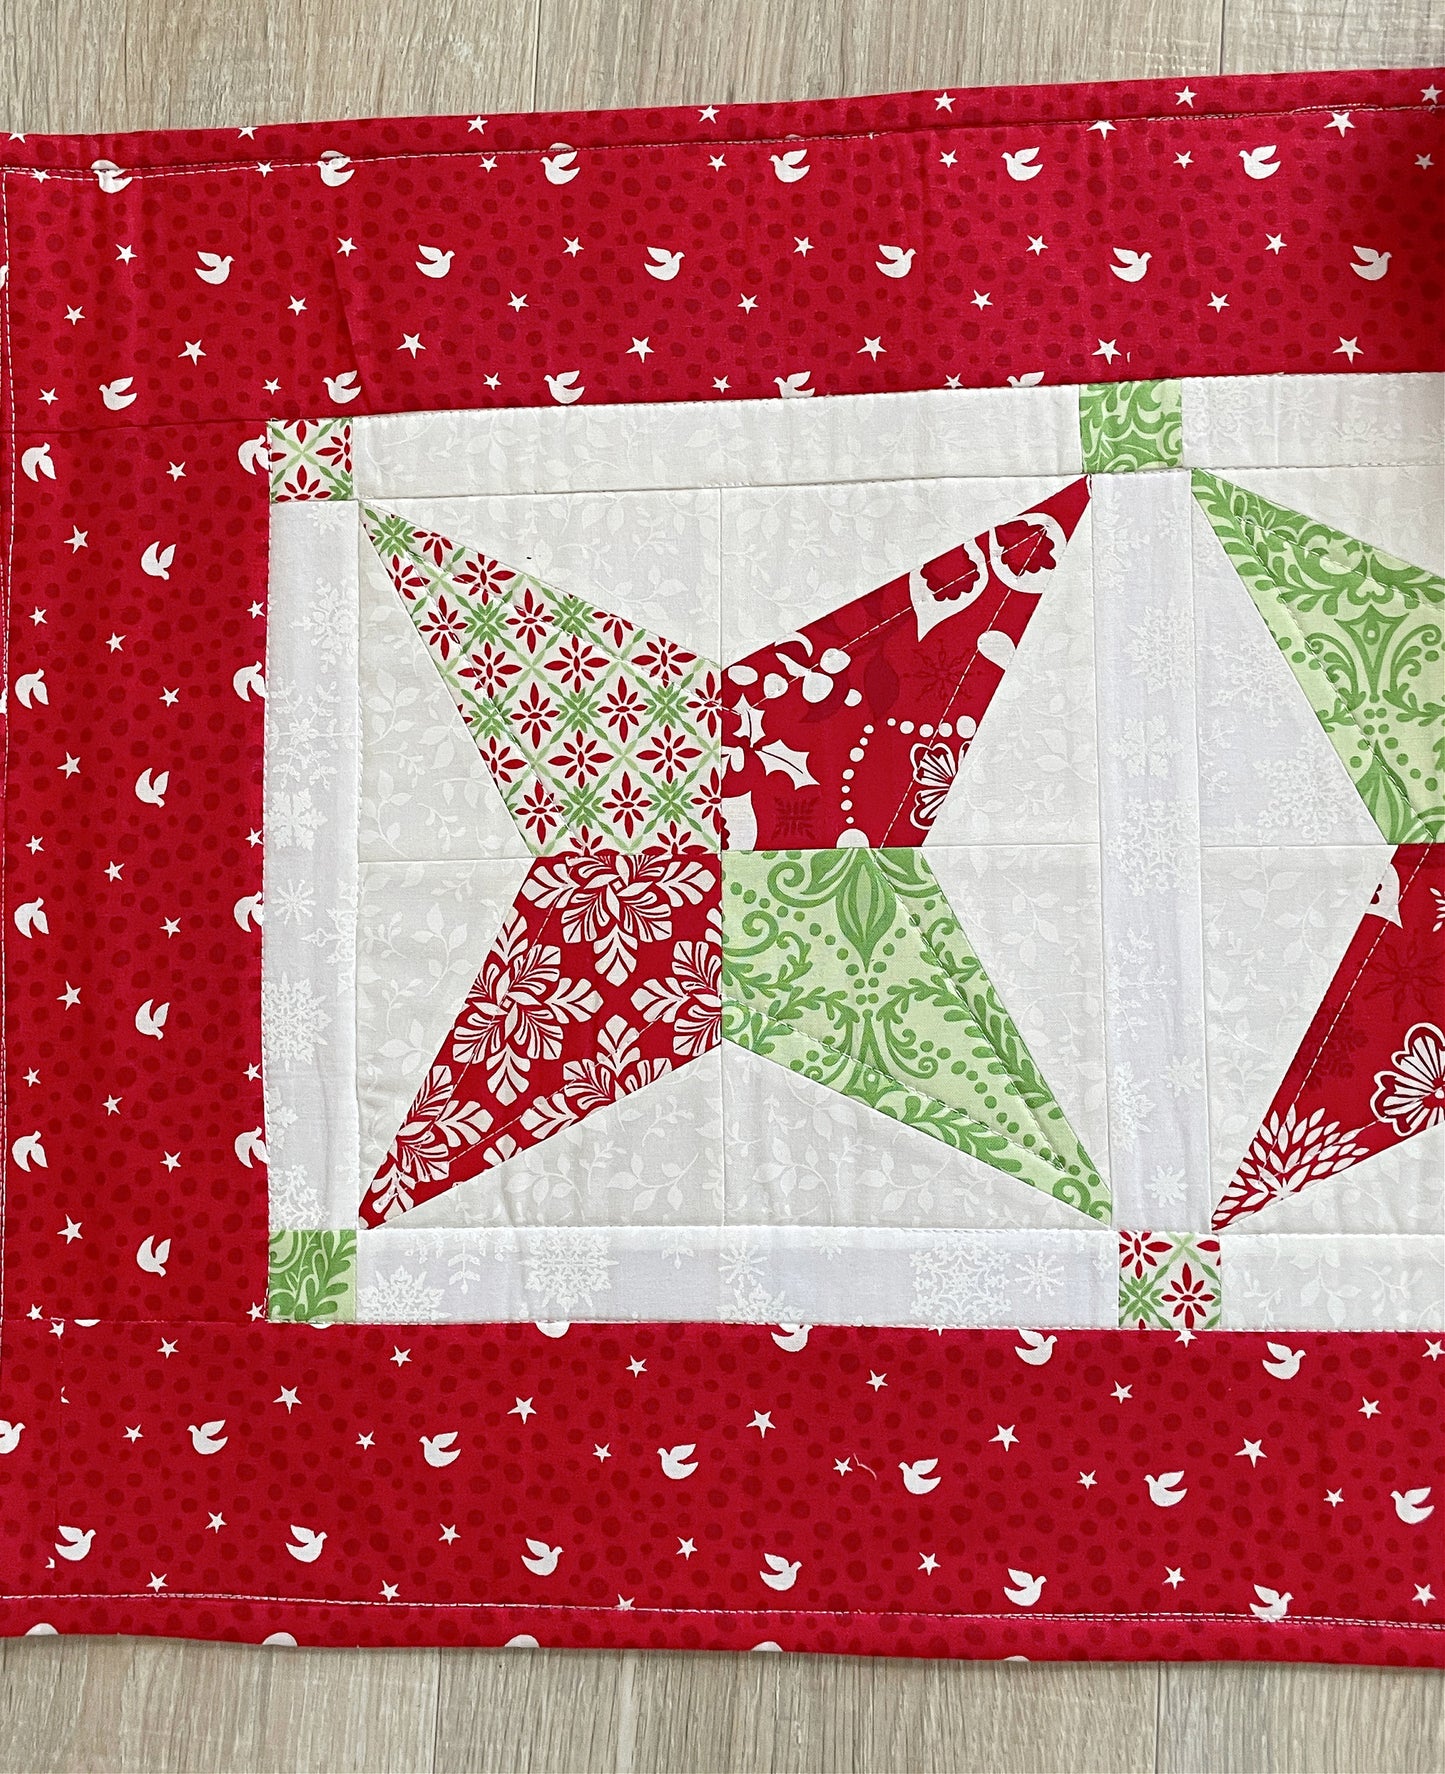 Quilted Christmas Star Table Runner, Contemporary Home Decor